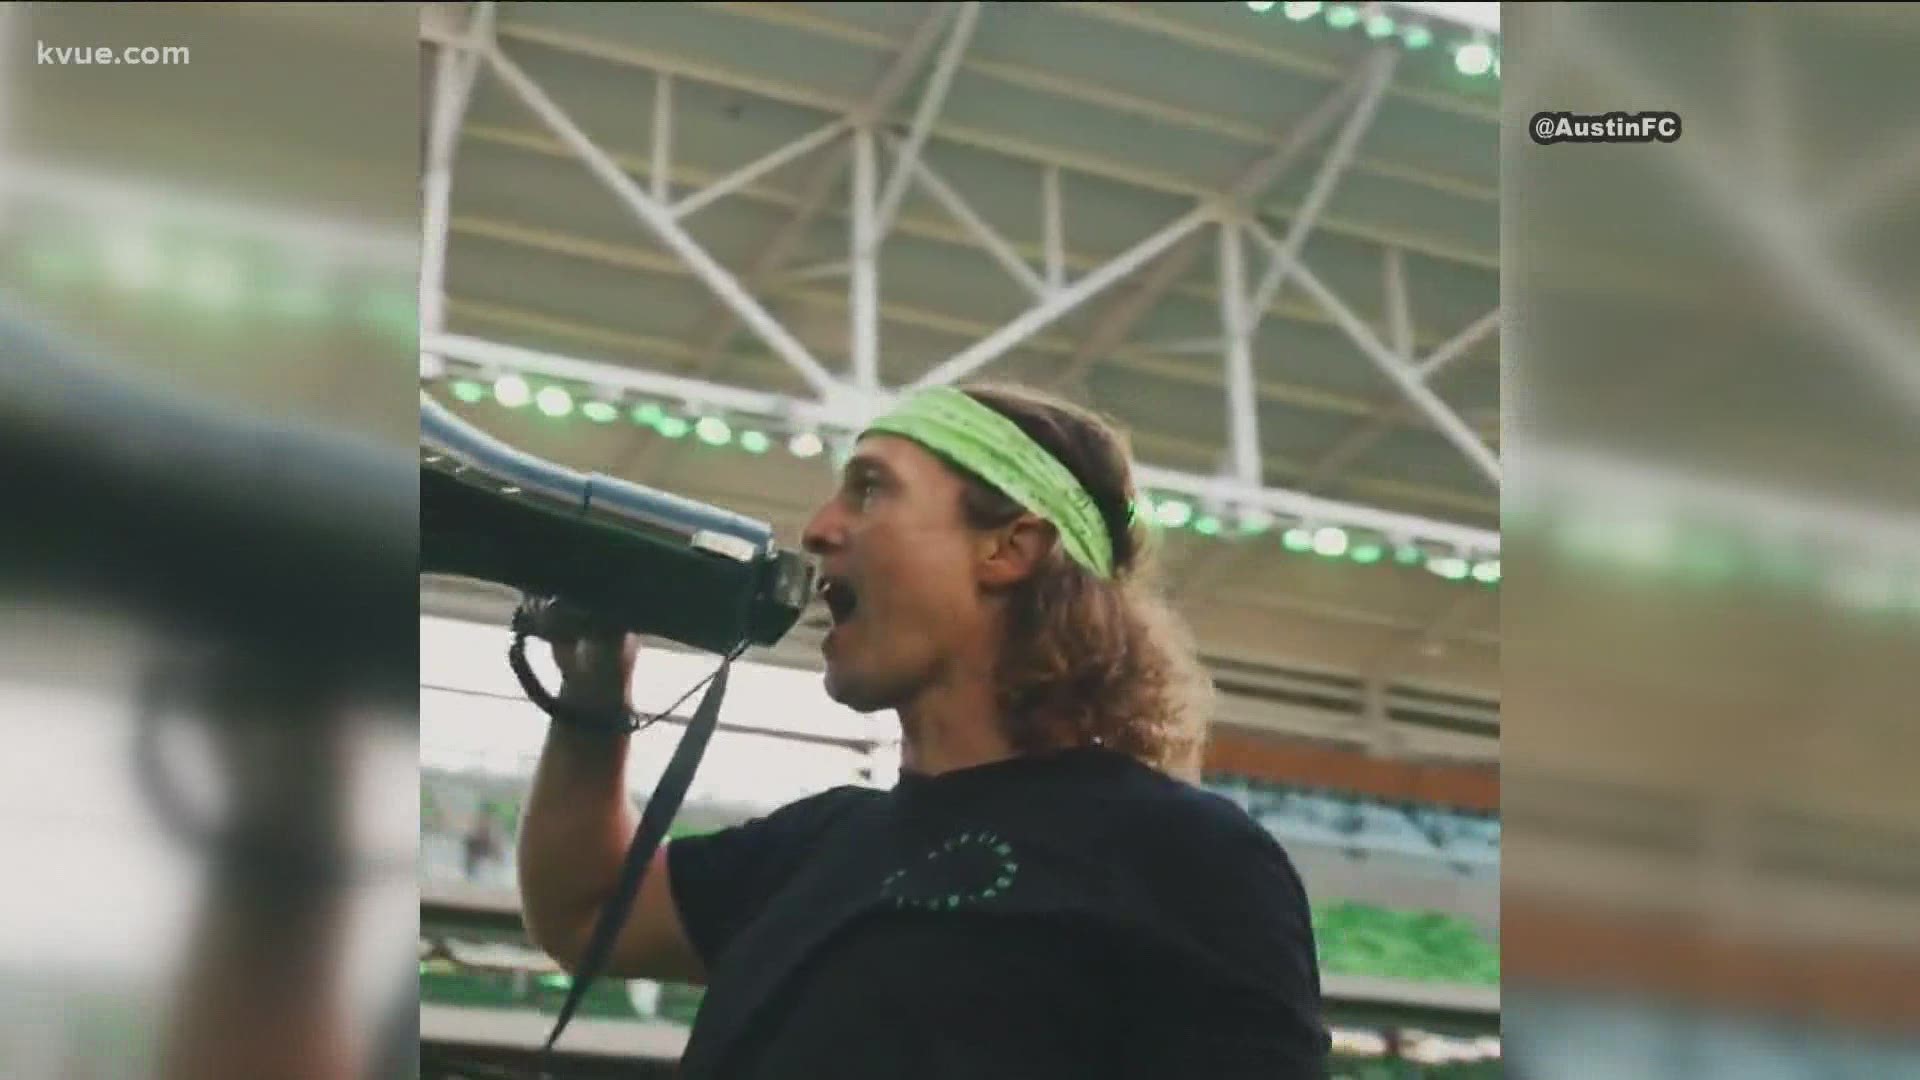 Austin FC part owner Matthew McConaughey showed up to the supporters groups' chant practice to join in on the #Verde fun!